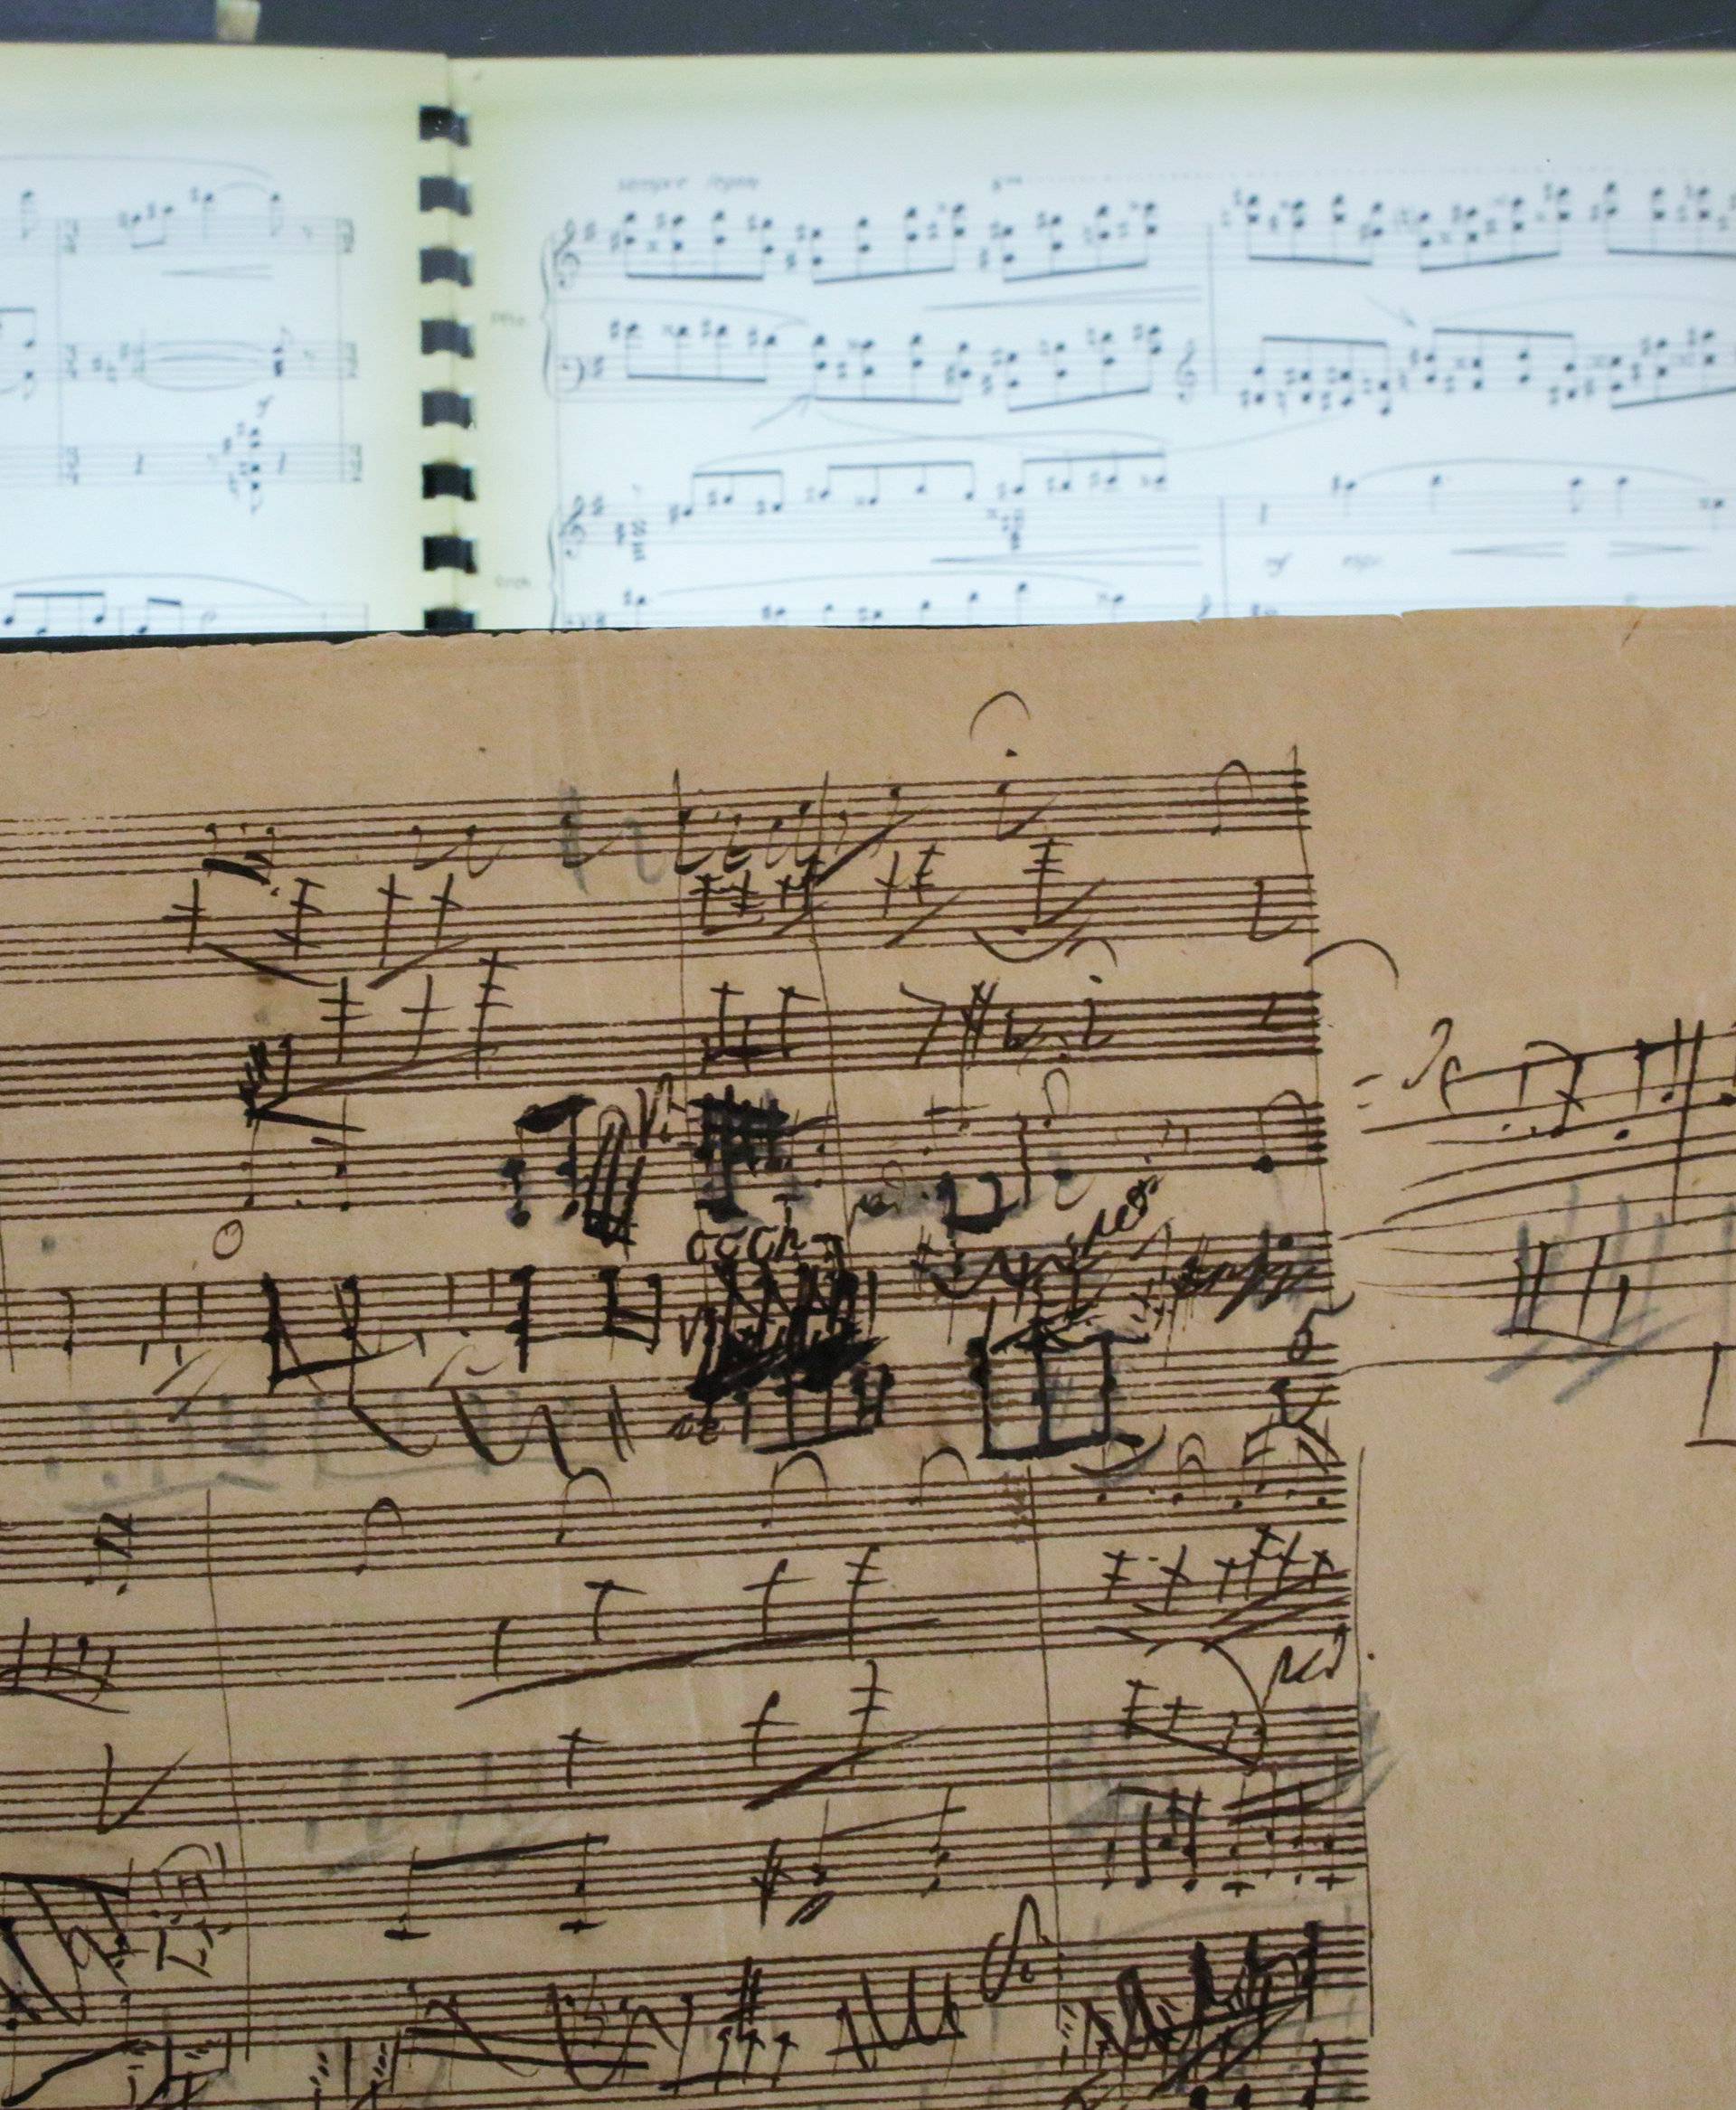 A rare autograph manuscript by Beethoven is displayed at Bonhams auction house in New York